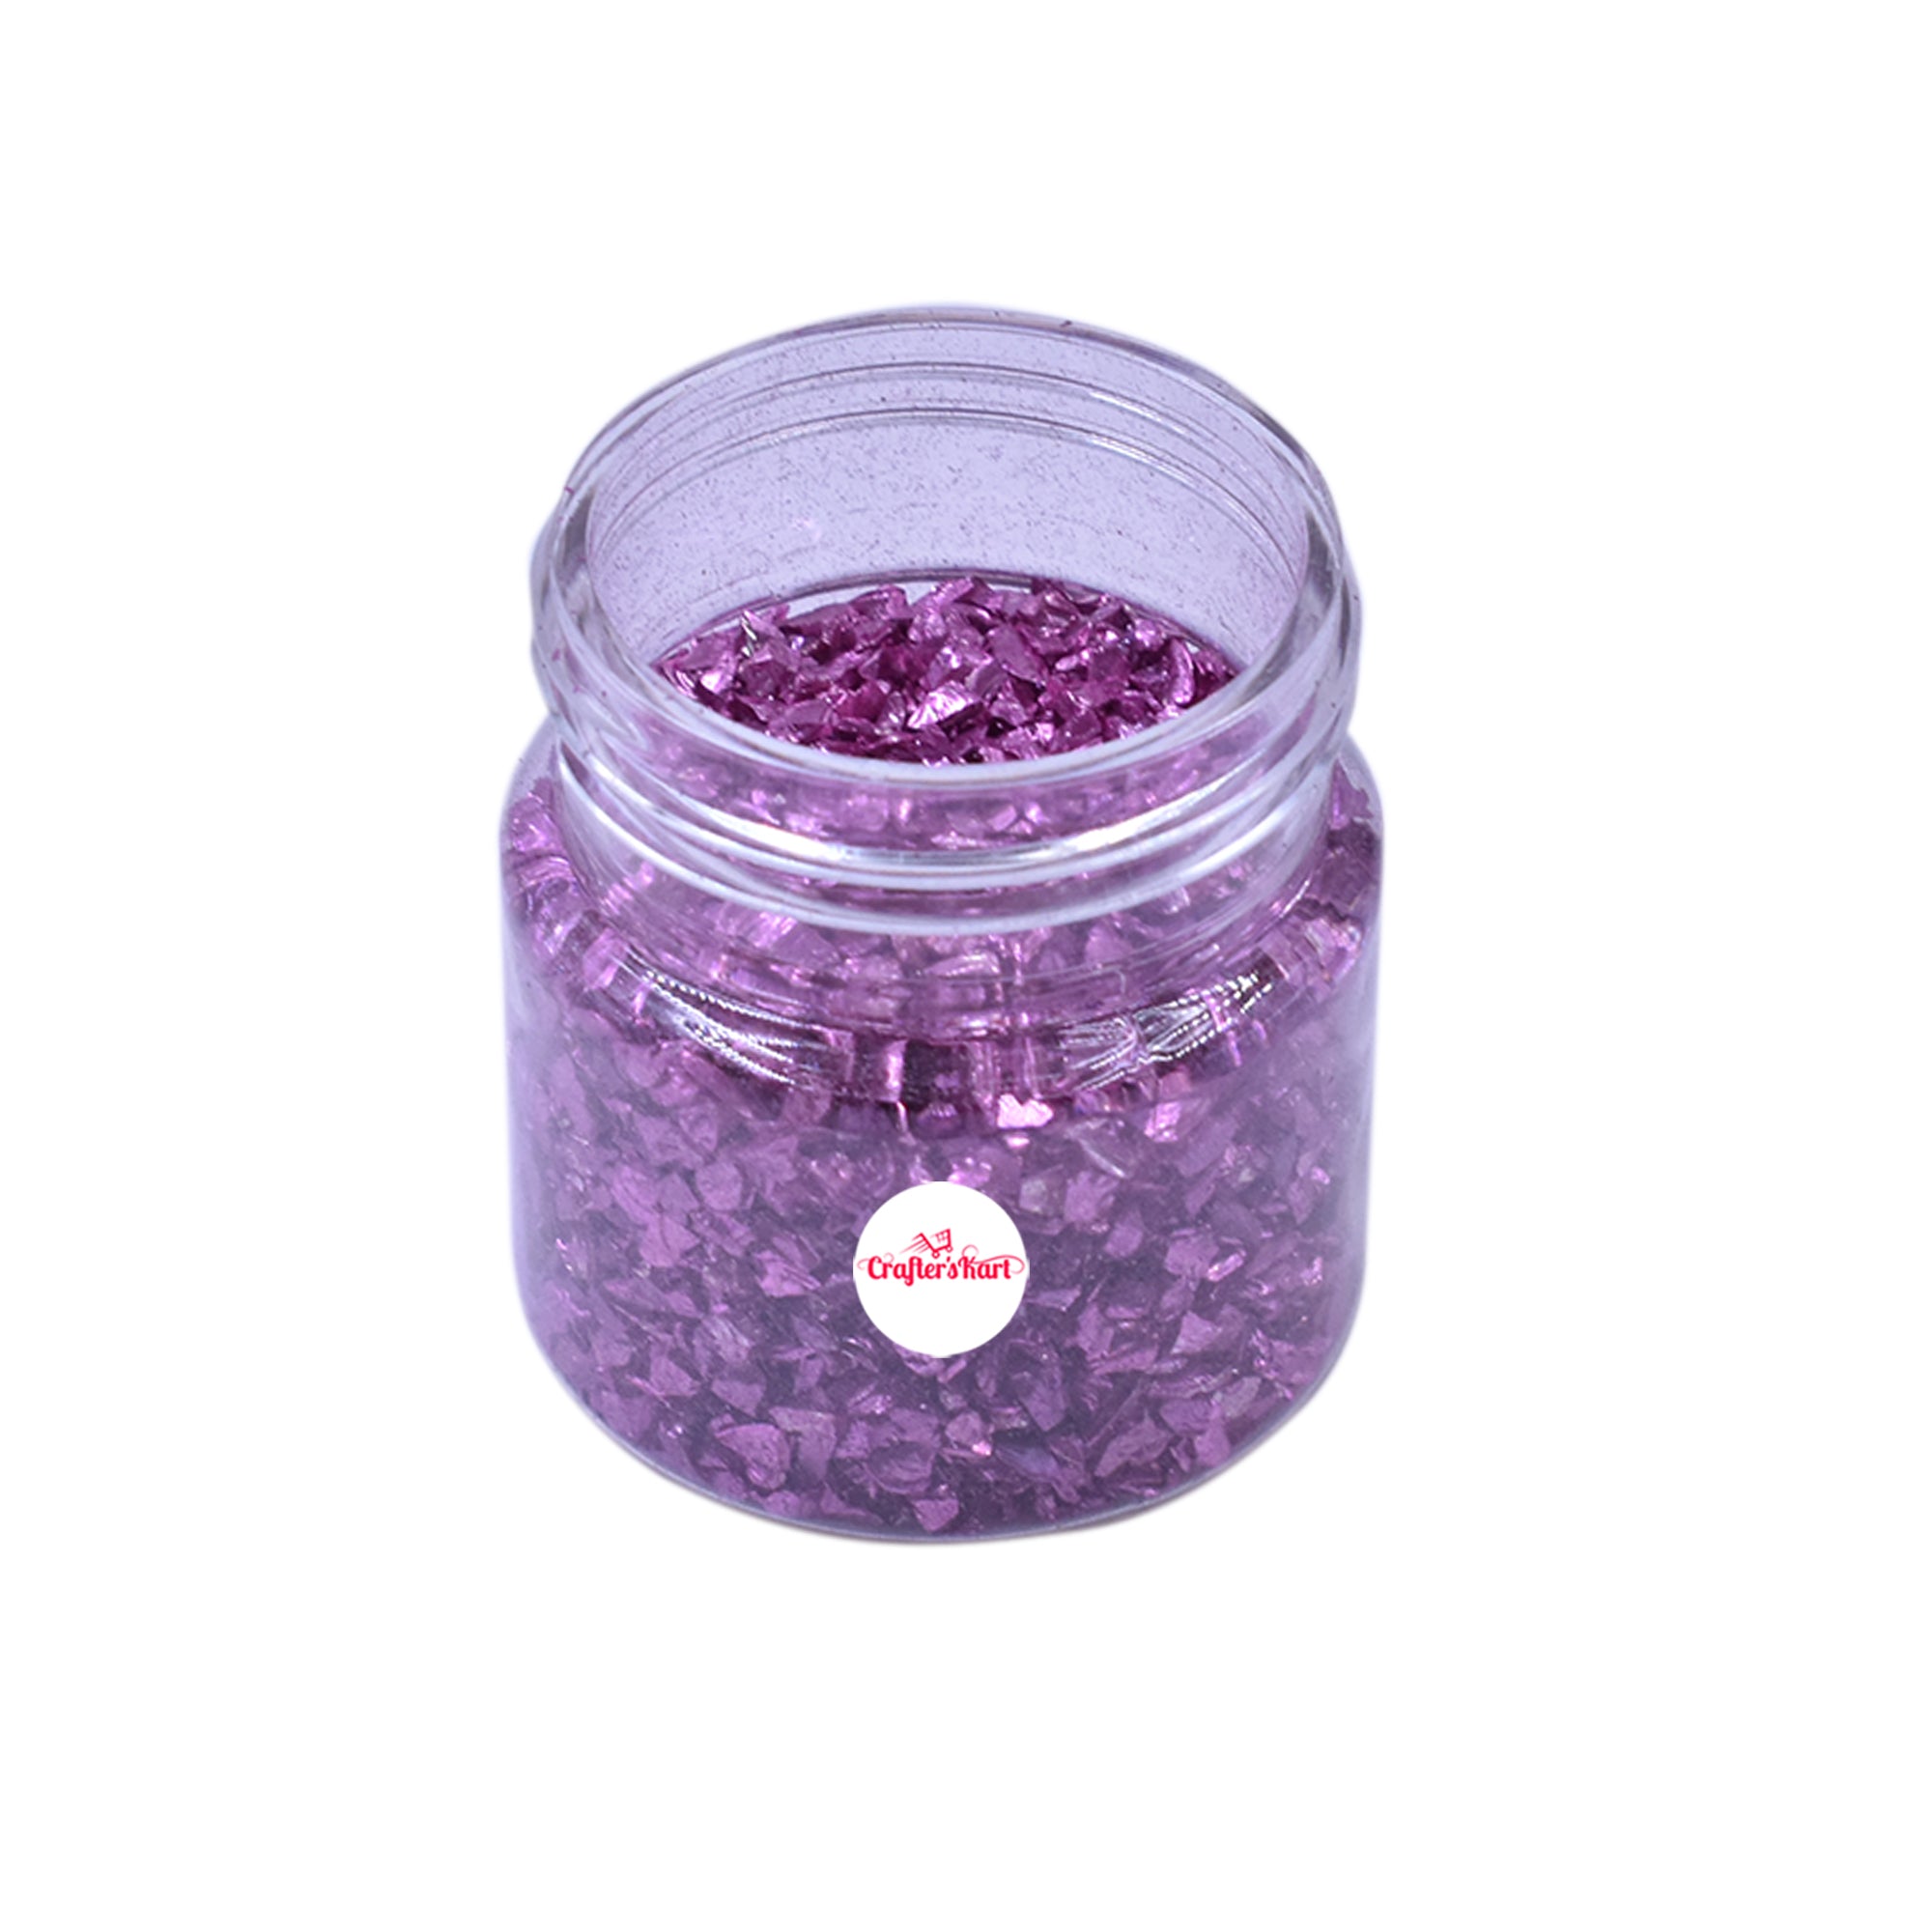 Crushed Glass Stone For Resin Art, Diy Crafts Etc.(violet Color, 20 Grams)  at Rs 89.00, Epoxy Resins